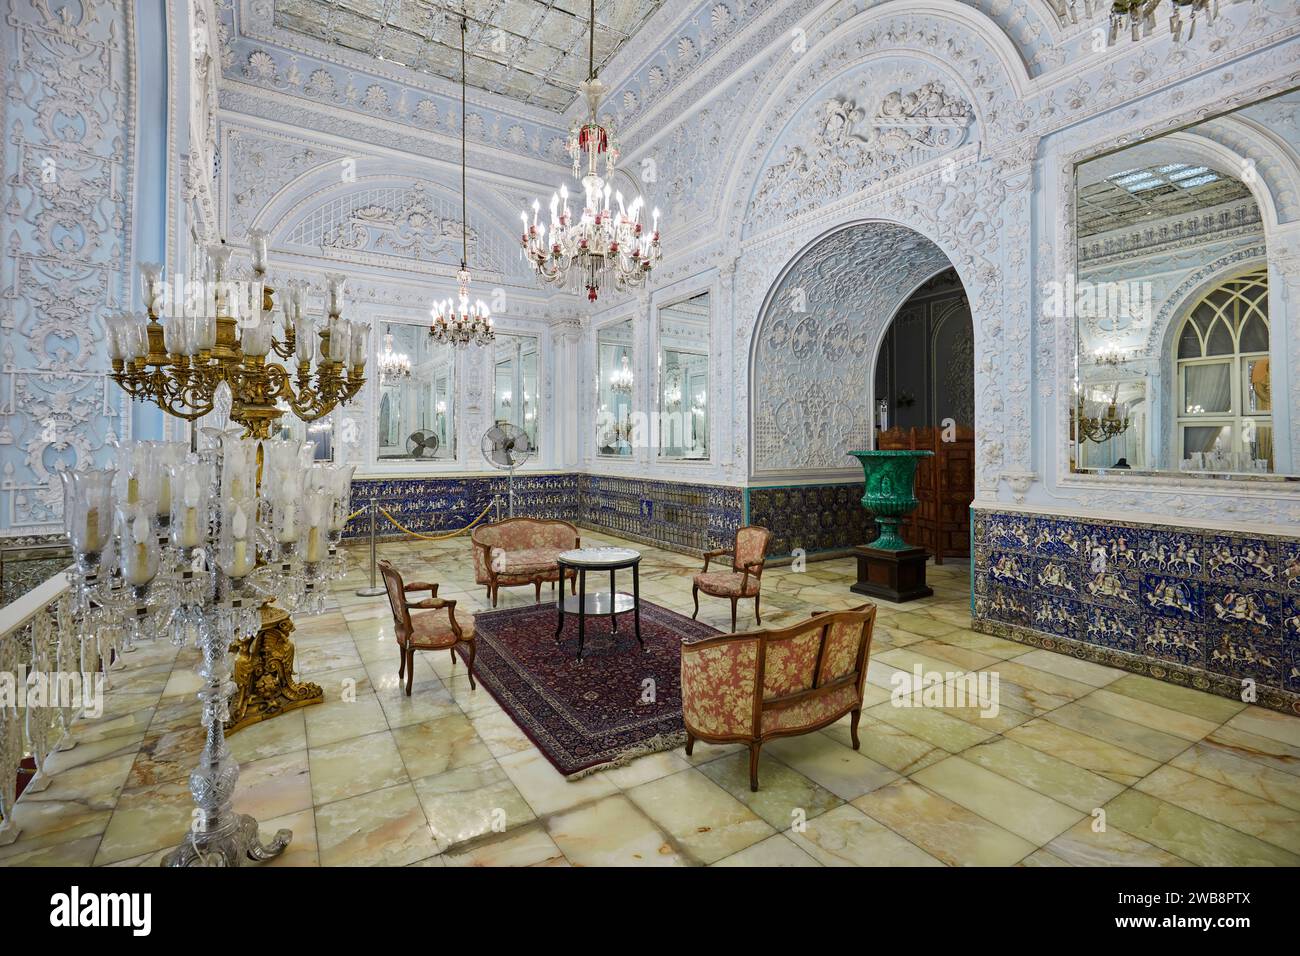 Interior view of a small sitting hall in the Golestan Palace with crystal chandeliers and intricate plaster work on walls. Tehran, Iran. Stock Photo